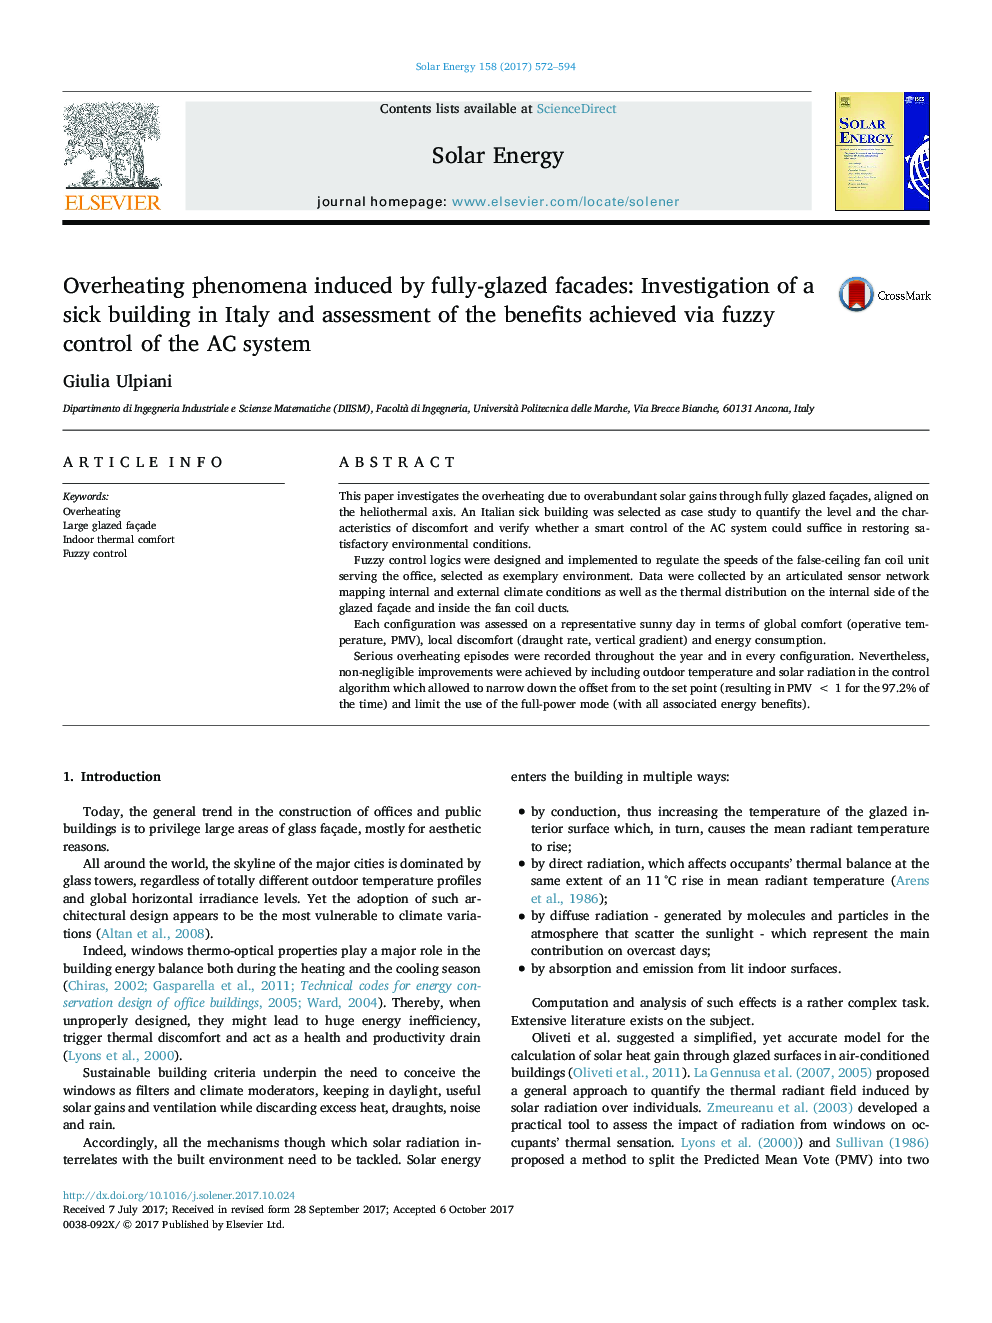 Overheating phenomena induced by fully-glazed facades: Investigation of a sick building in Italy and assessment of the benefits achieved via fuzzy control of the AC system